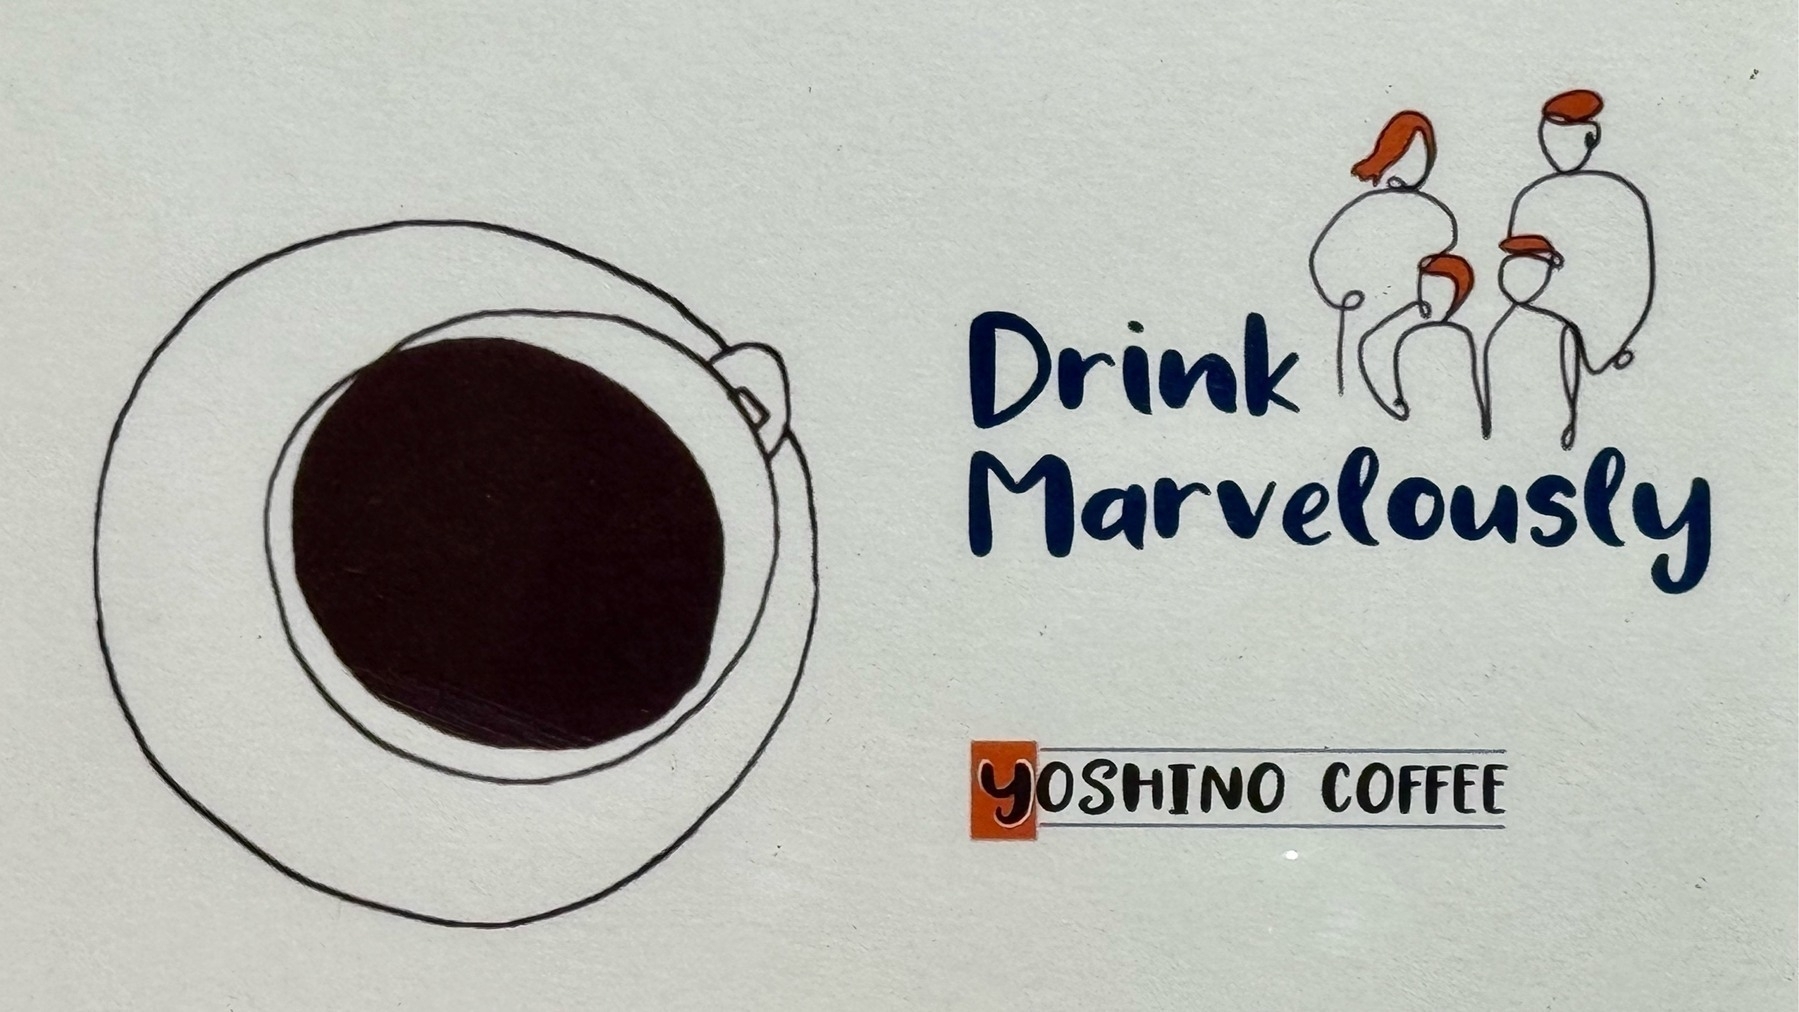 Hand-drawn sign with an illustration of a cup of black coffee on a saucer, with the words "Drink Marvellously", and the name of the coffee shop, Yoshino Coffee.